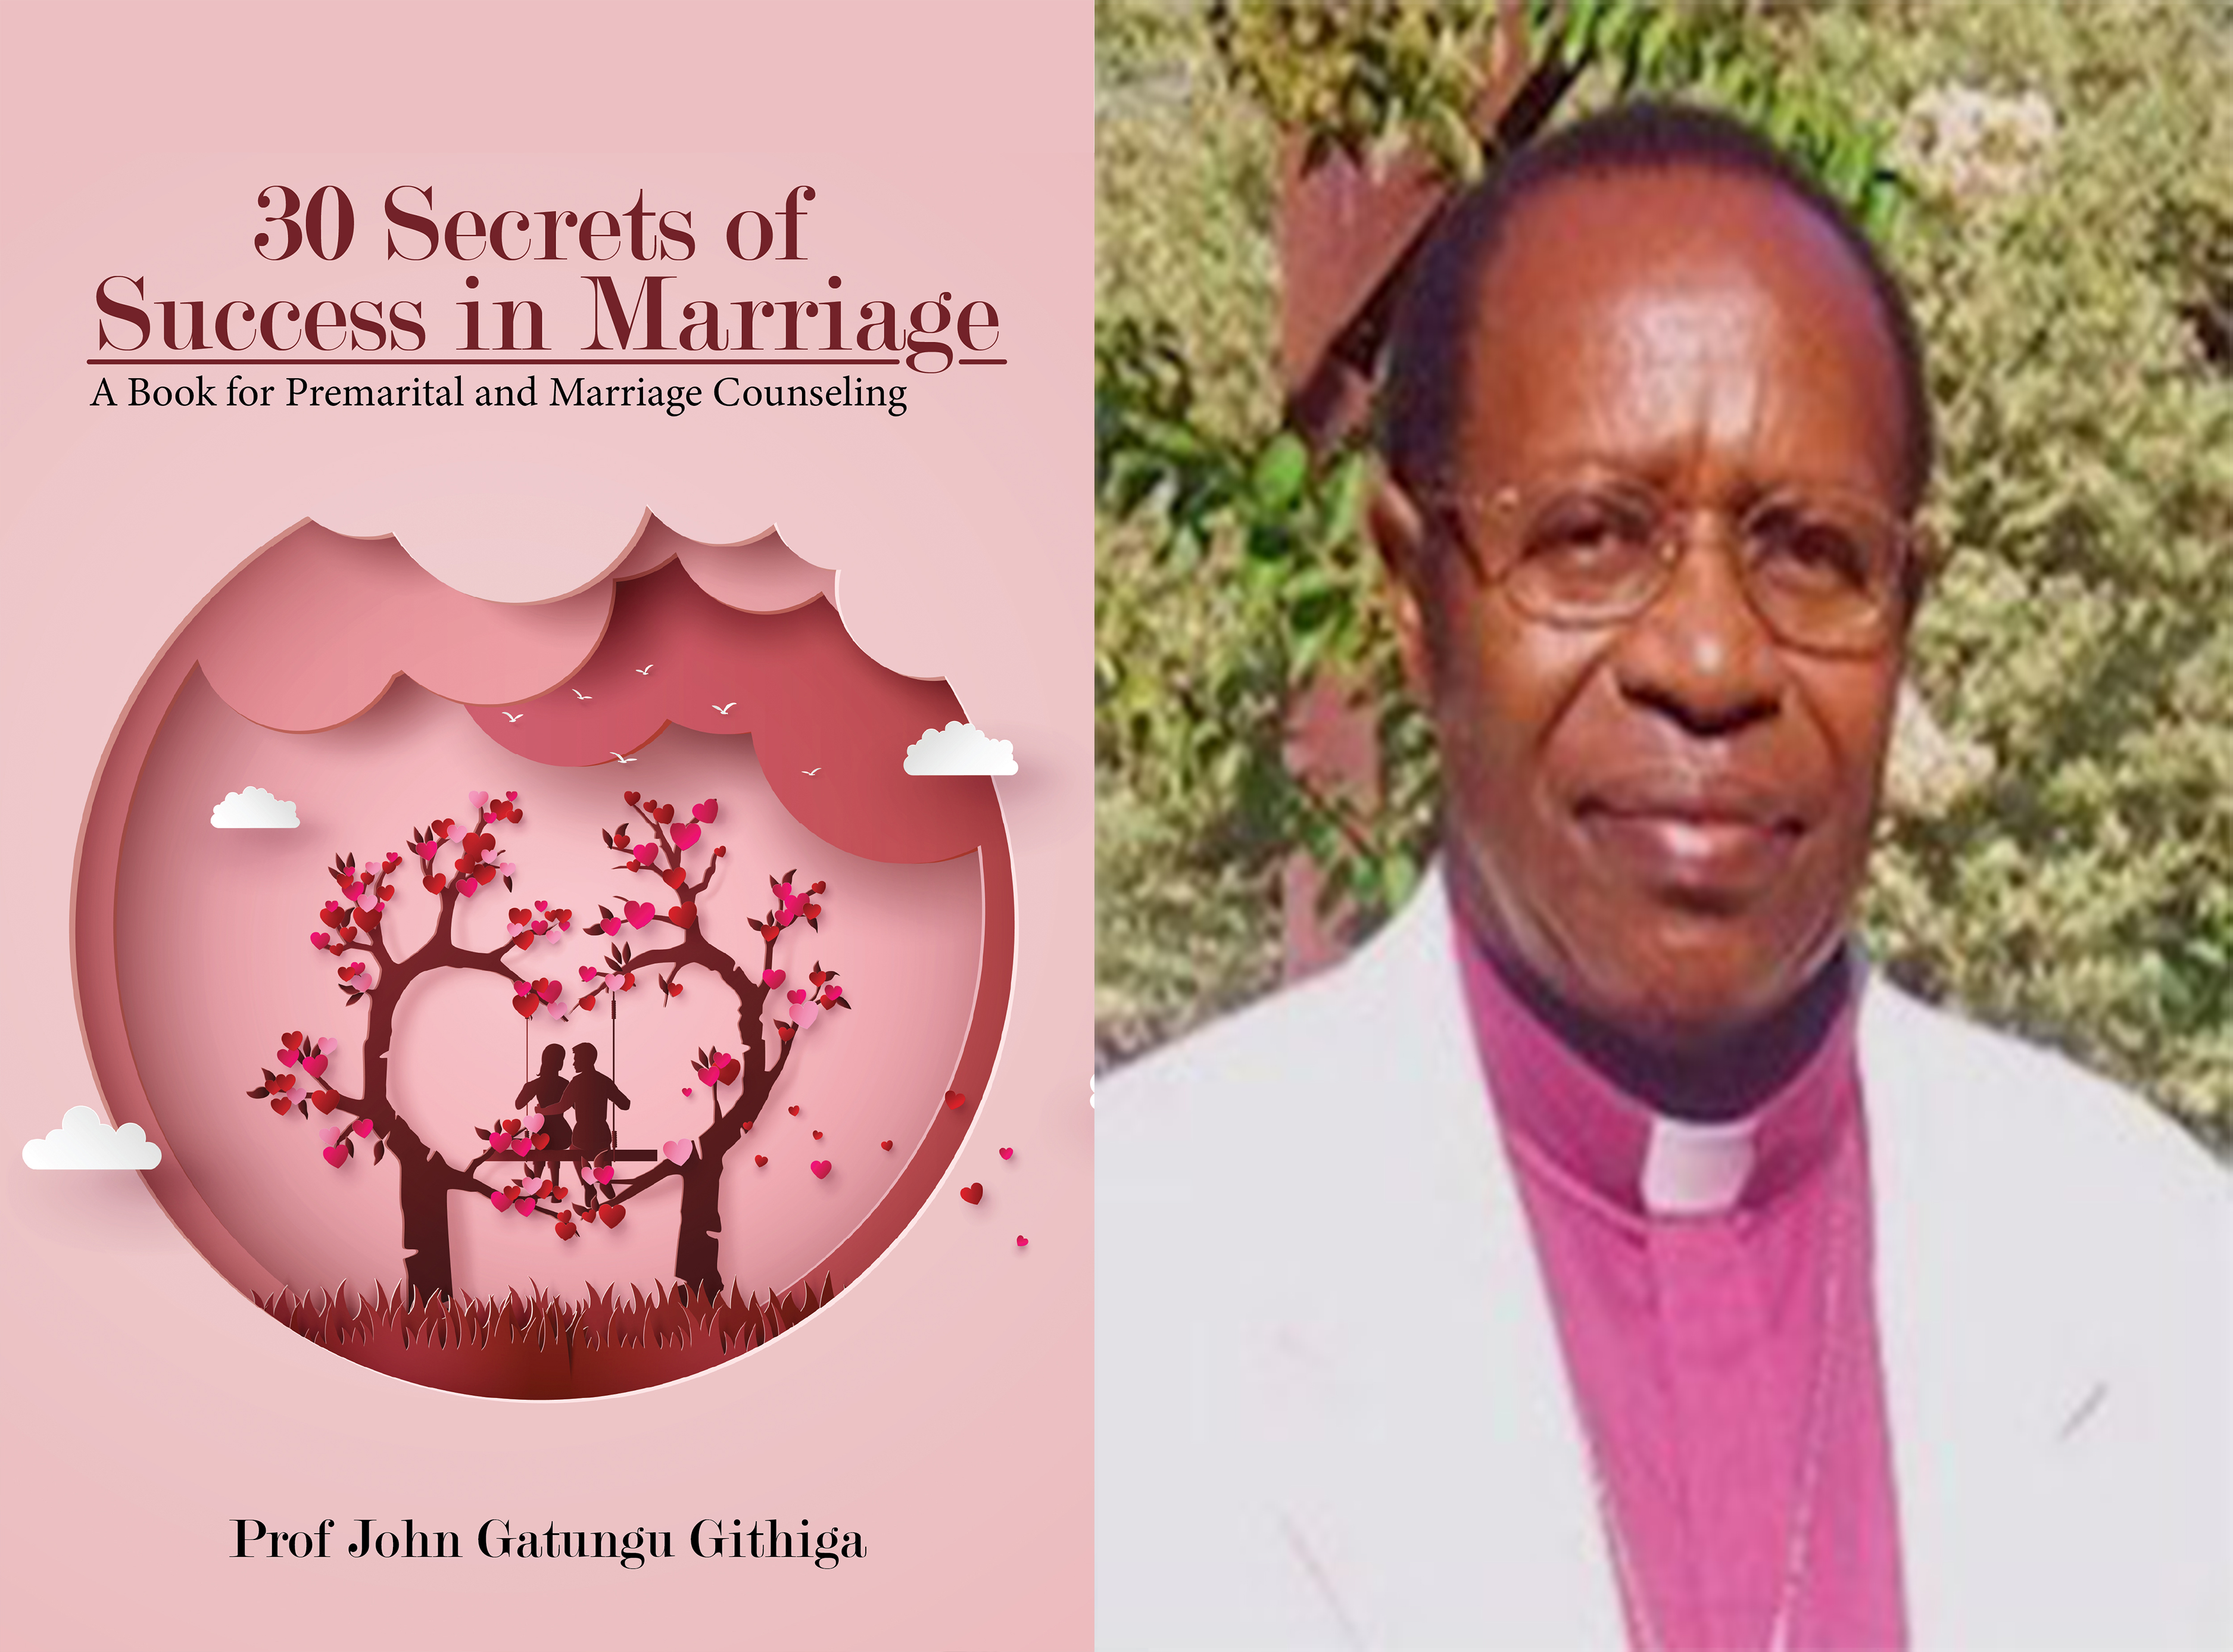 Prof. John Githiga’s Latest Book Shares Keys to Living a Happy Married Life